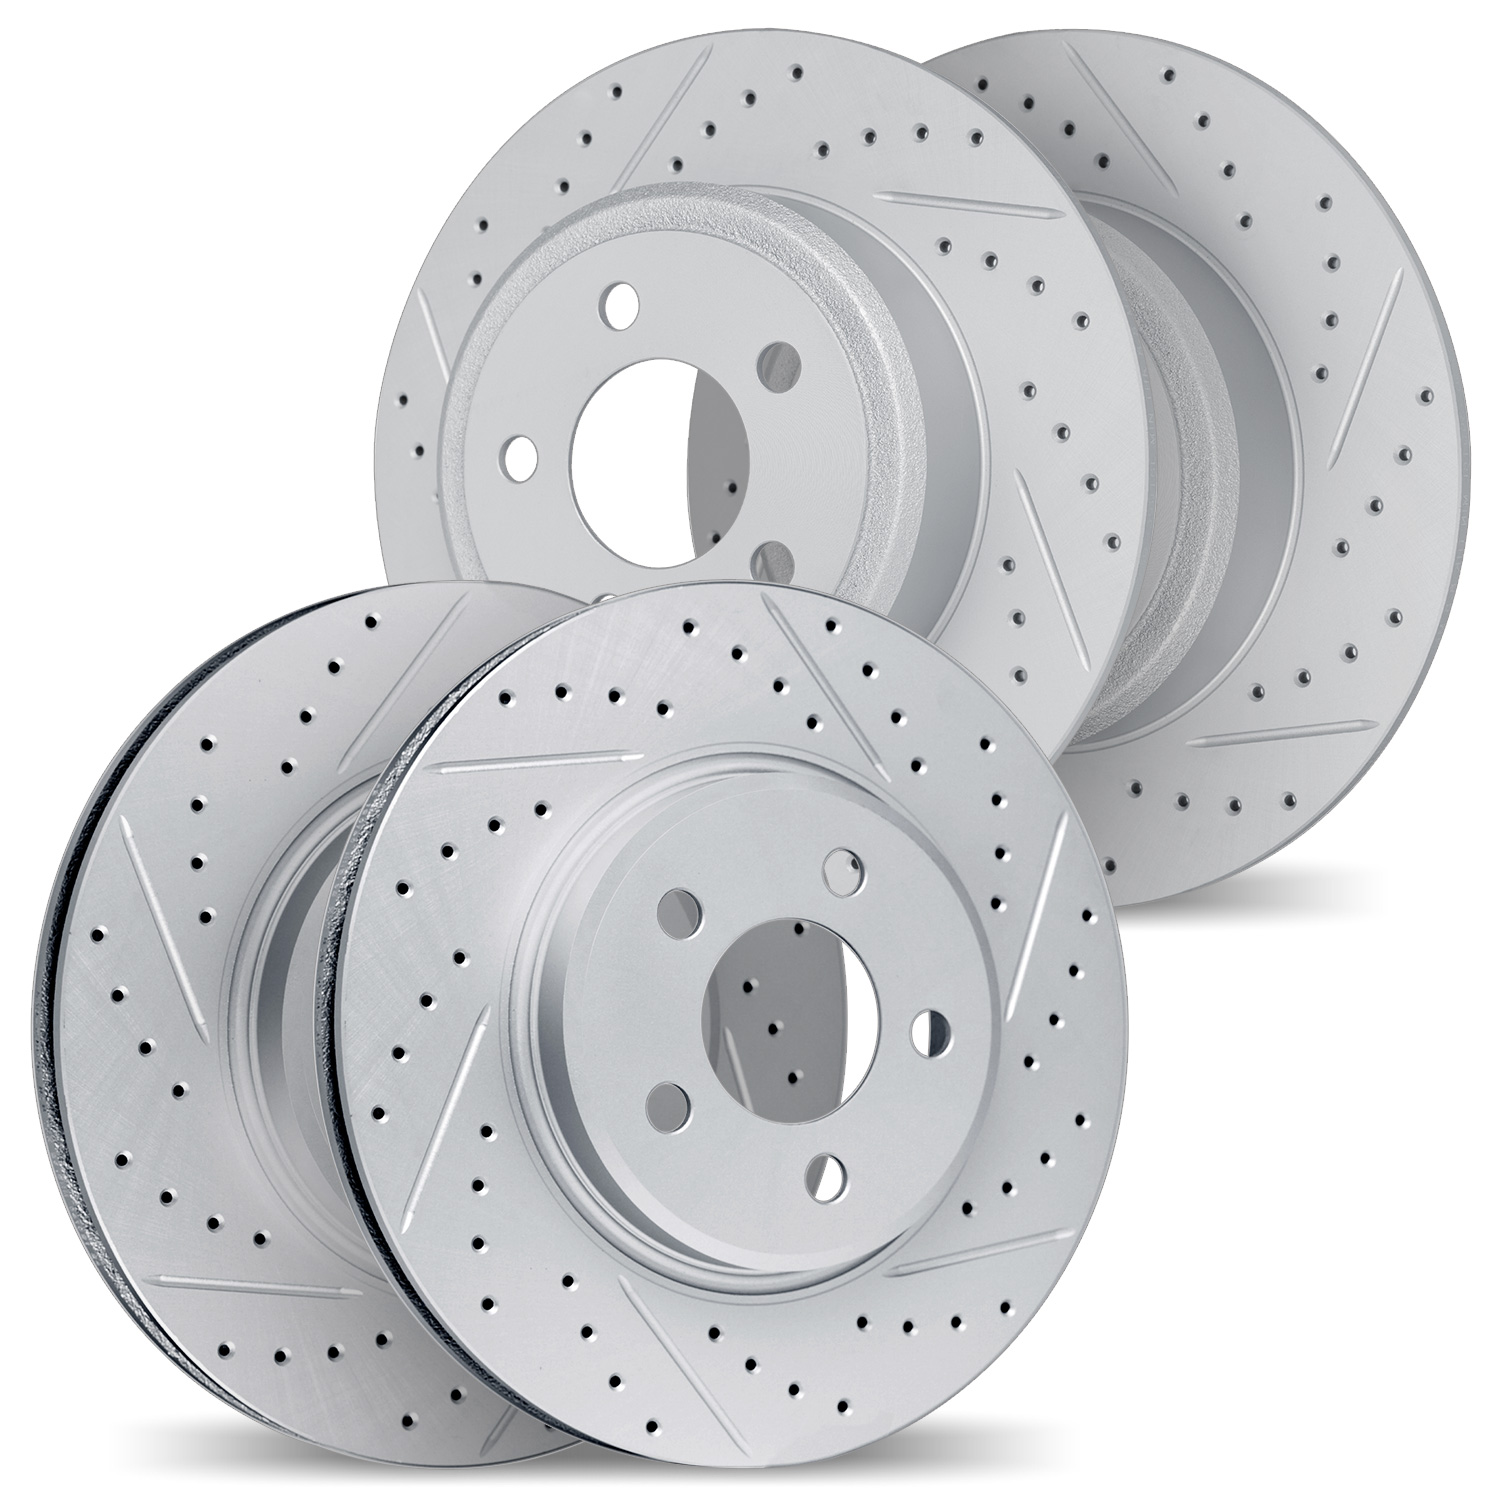 2004-73044 Geoperformance Drilled/Slotted Brake Rotors, 2001-2006 Audi/Volkswagen, Position: Front and Rear